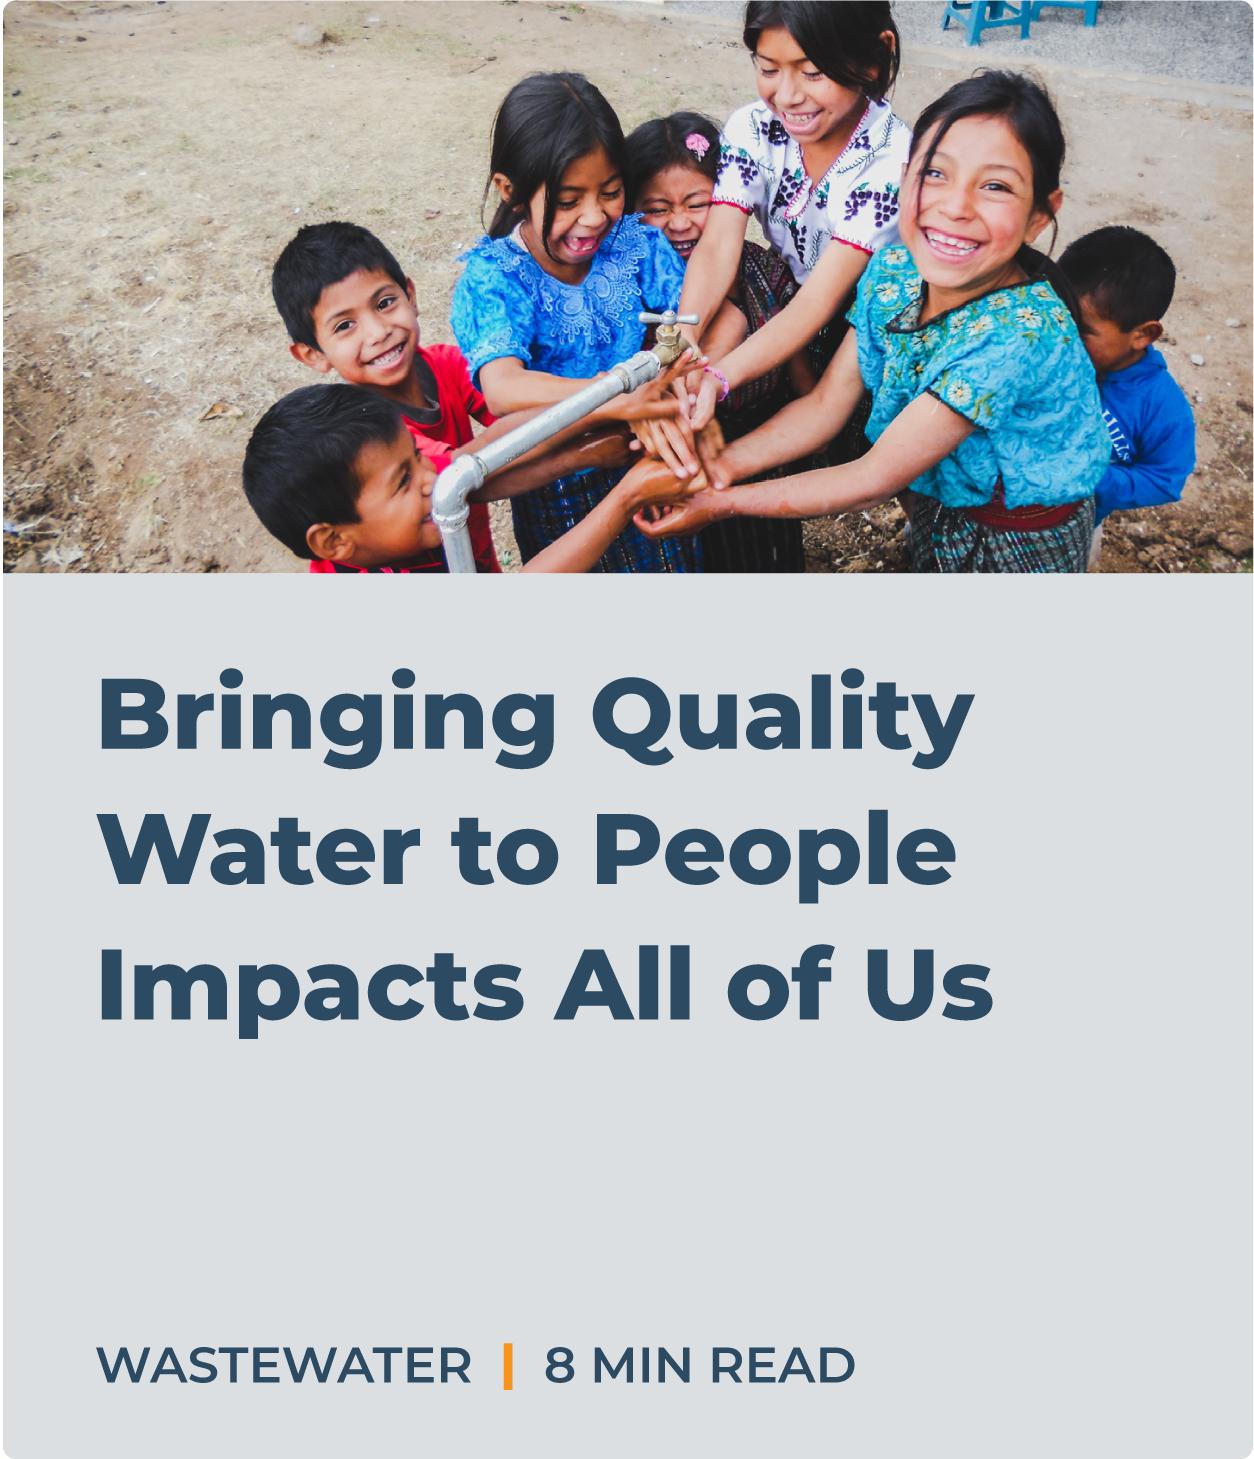 Bringing Quality Water to People Impacts All of Us